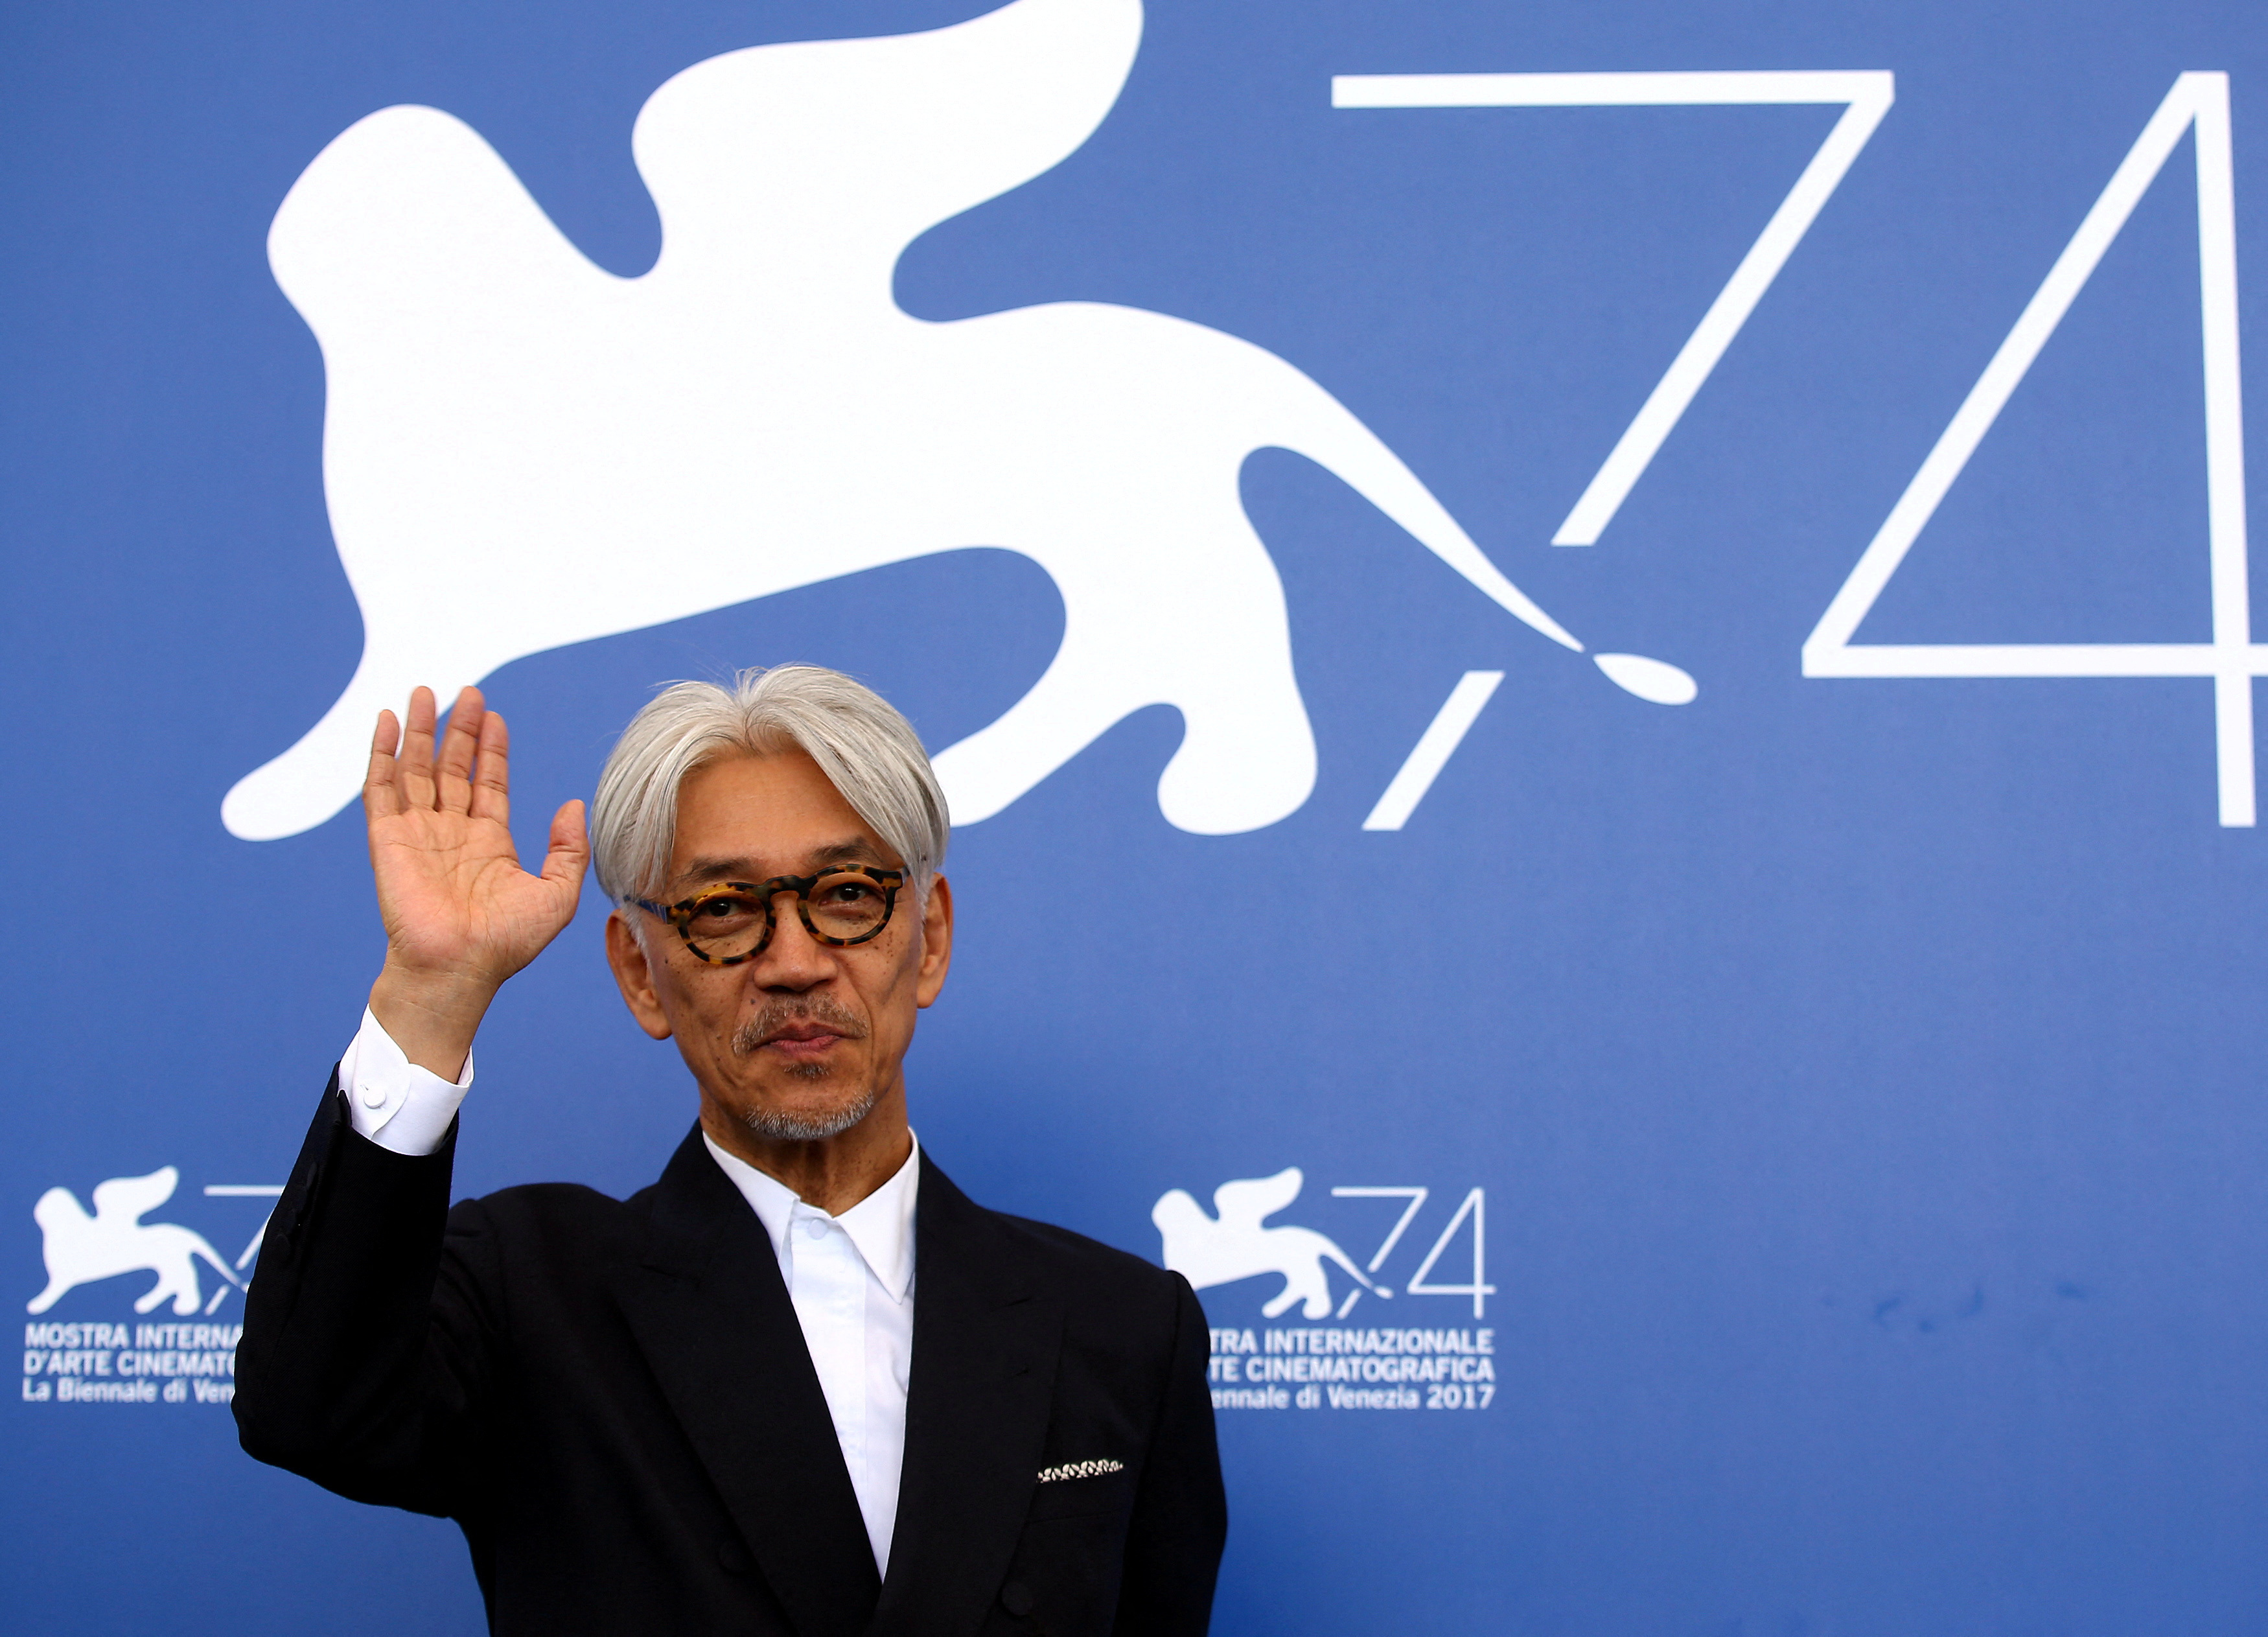 Japanese musician and composer Sakamoto waves during a photocall for the movie 